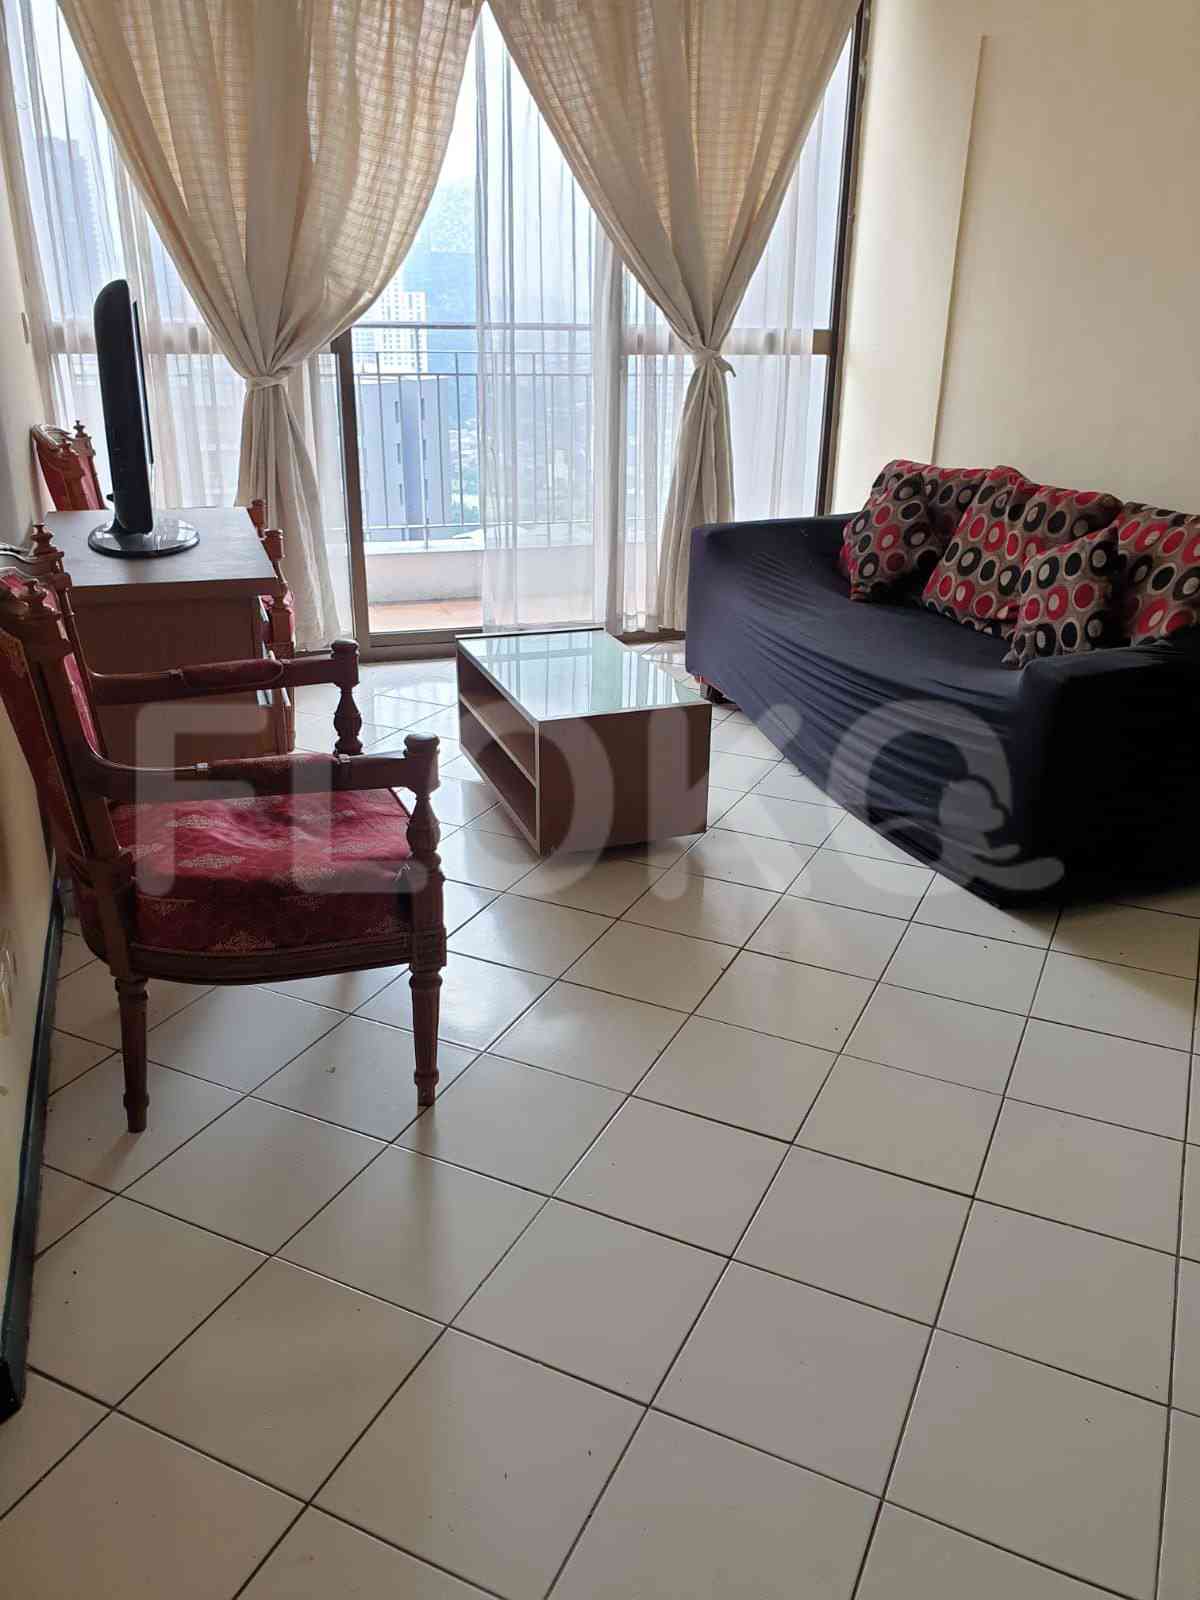 1 Bedroom on 16th Floor for Rent in Victoria Square Apartment - fka8f7 4